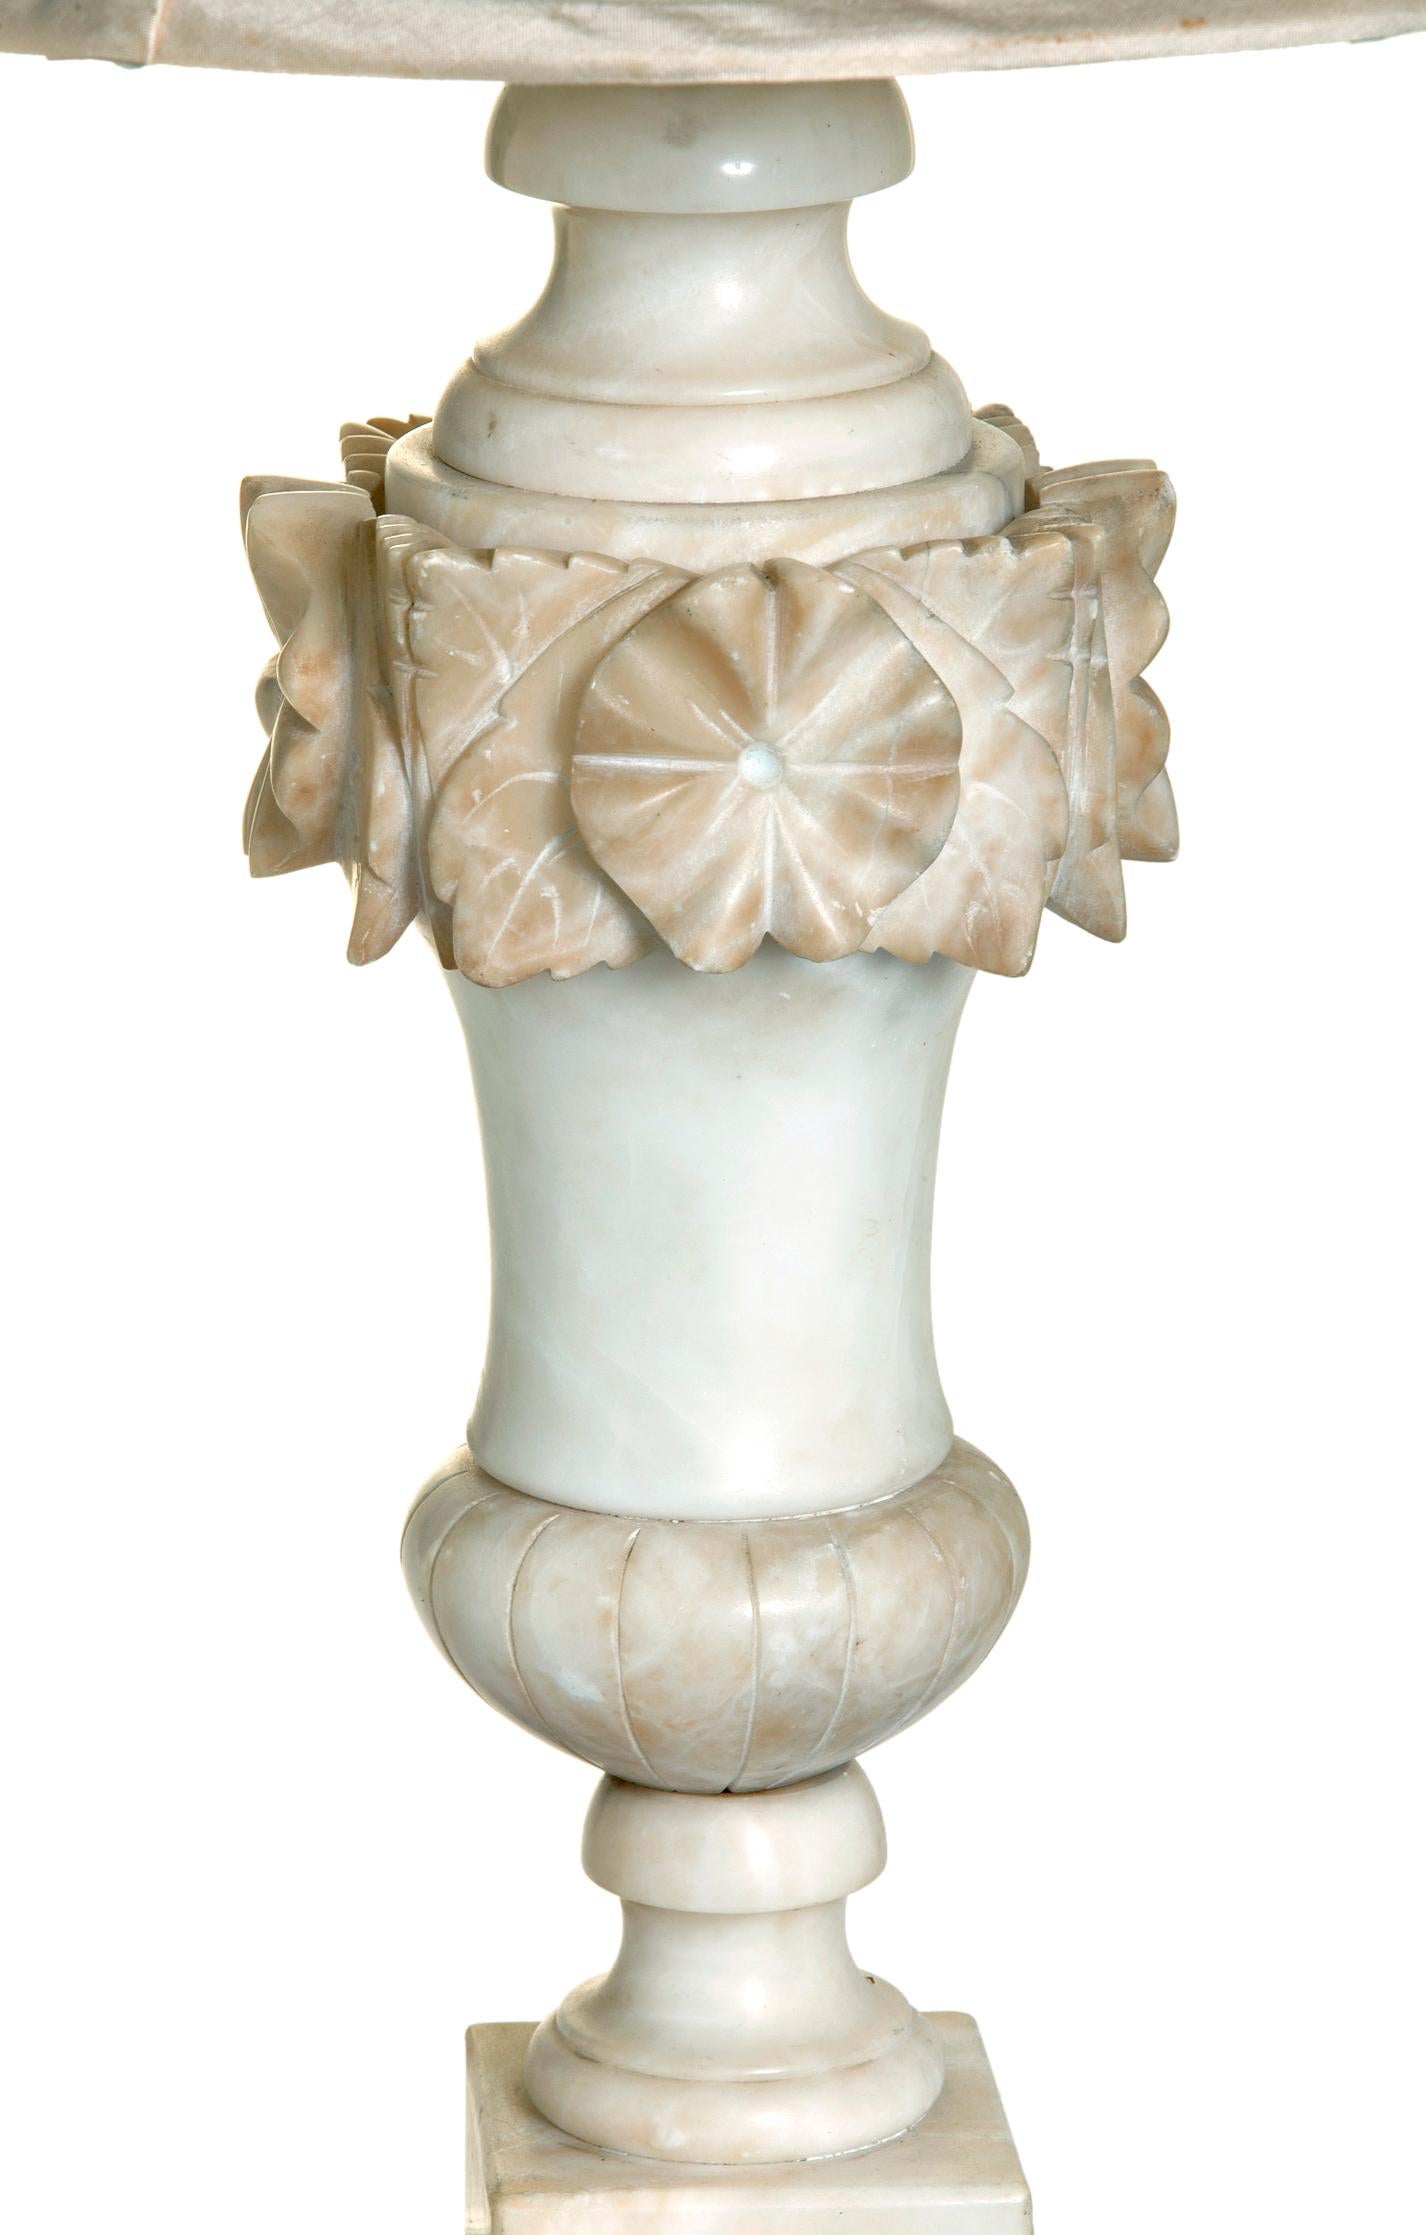 Early 20th C Italian hand-carved Alabaster Neoclassical baluster urn lamp embellished with a wreath of flowers around the top of the urn.
The blush tones & matter finish make this lamp a rare find.